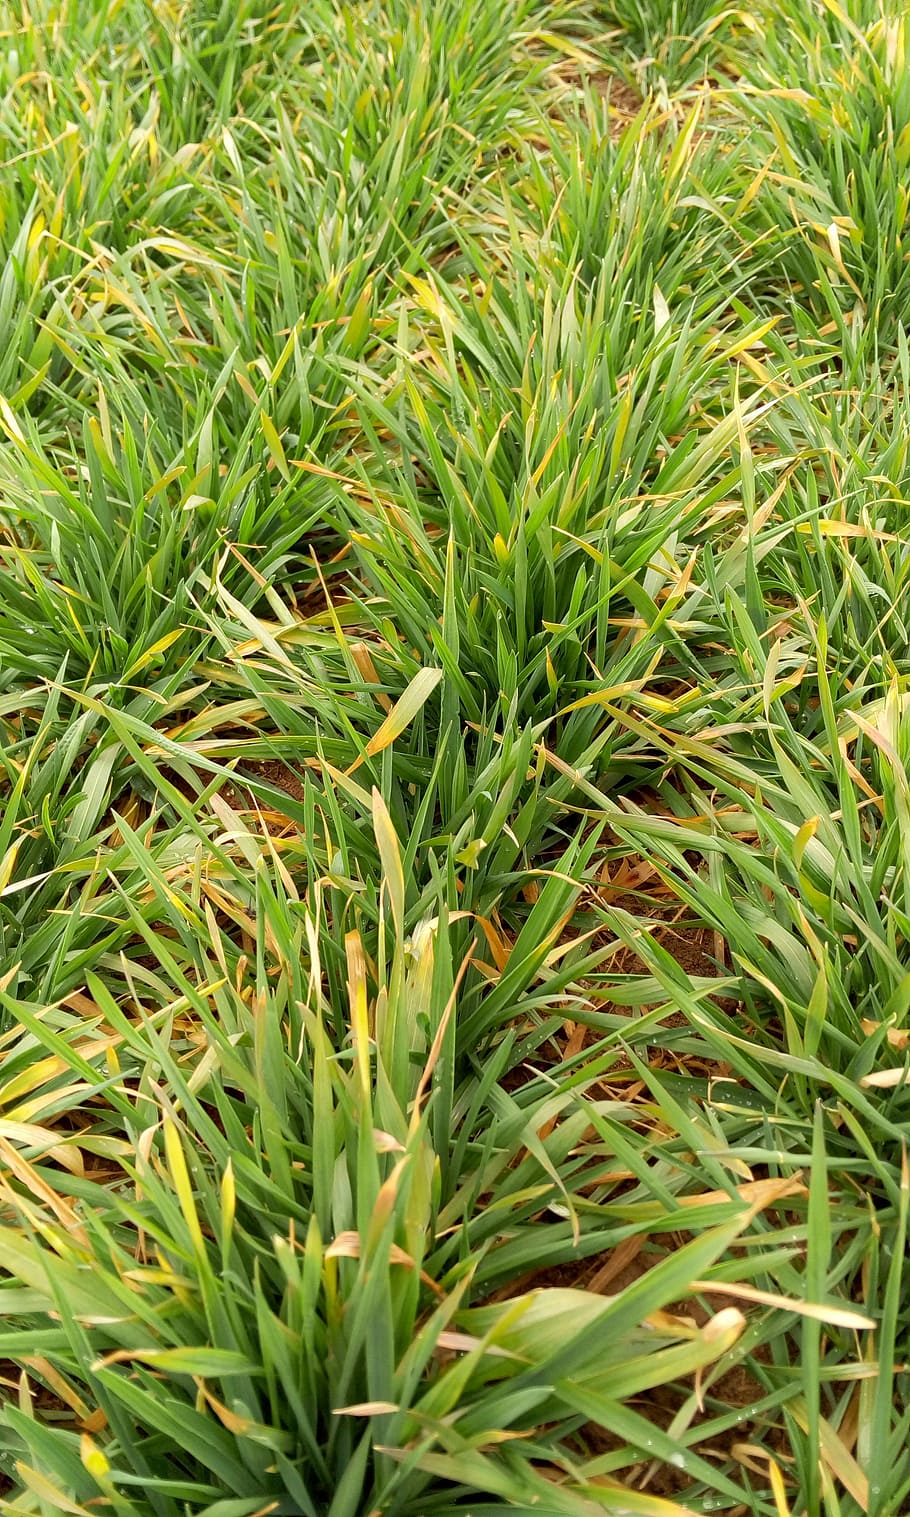 Winter Wheat, Life, green, growth, grass, green color, plant